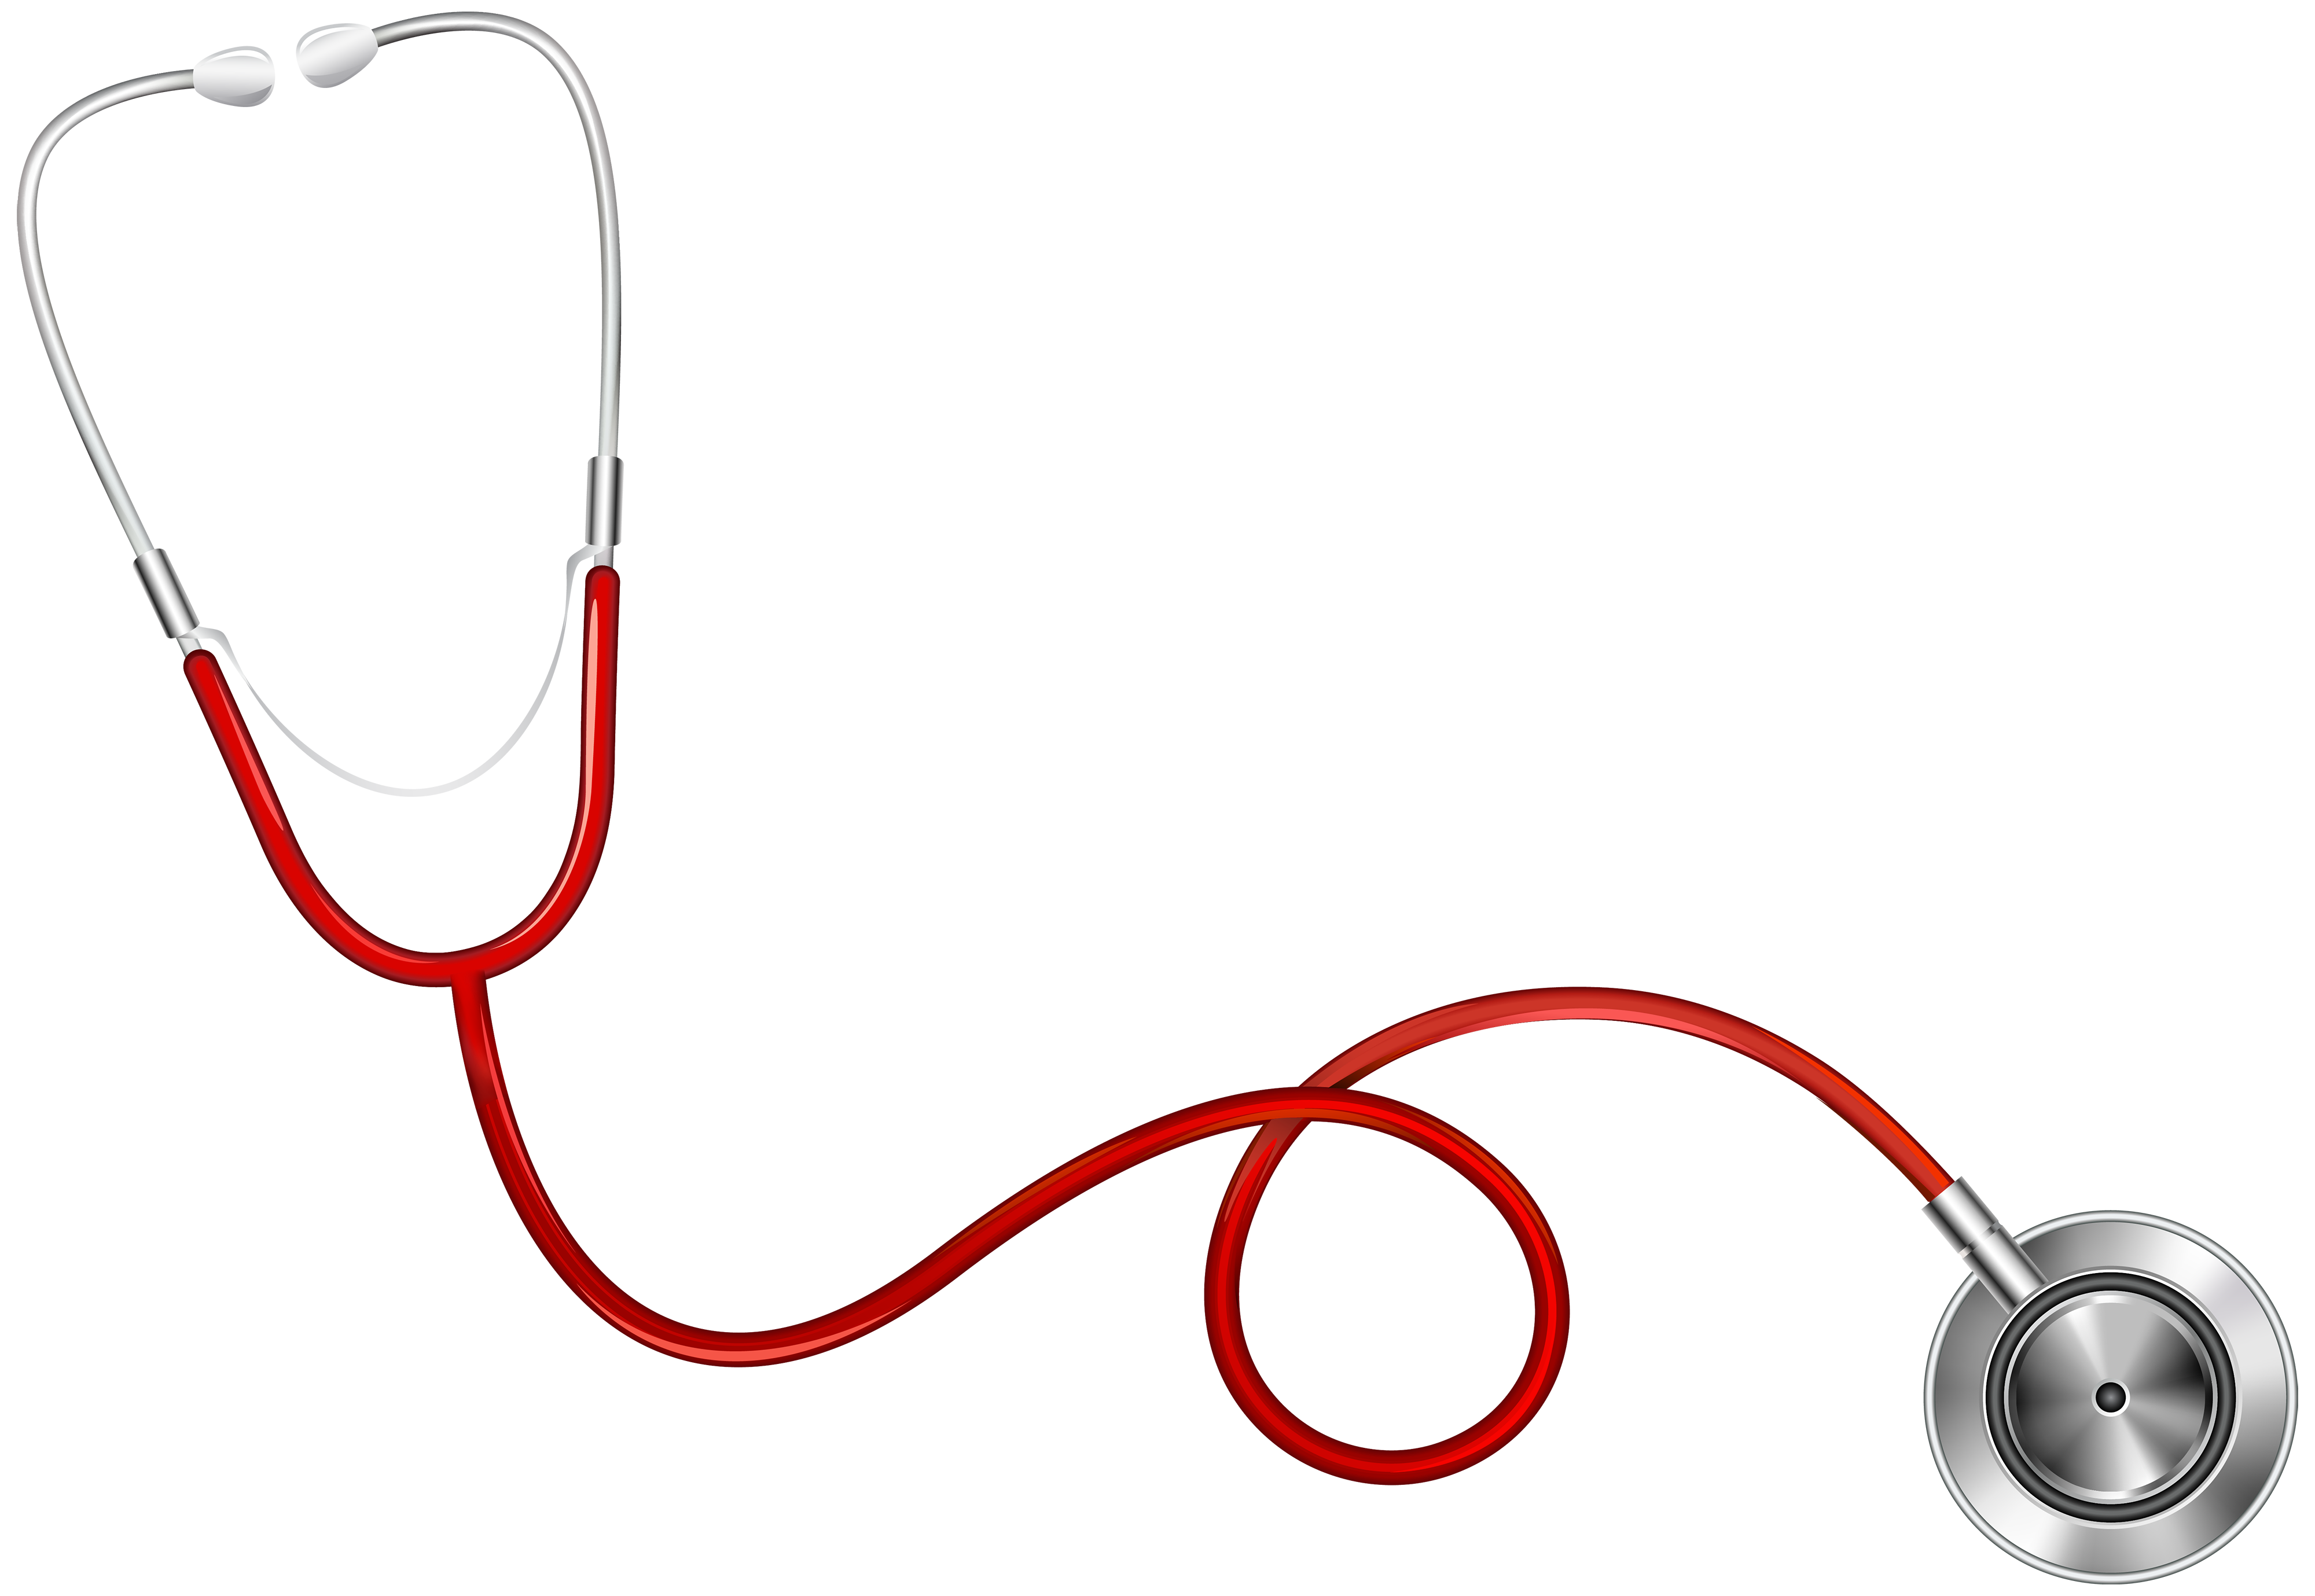 Doctors Stethoscope PNG Clipart.